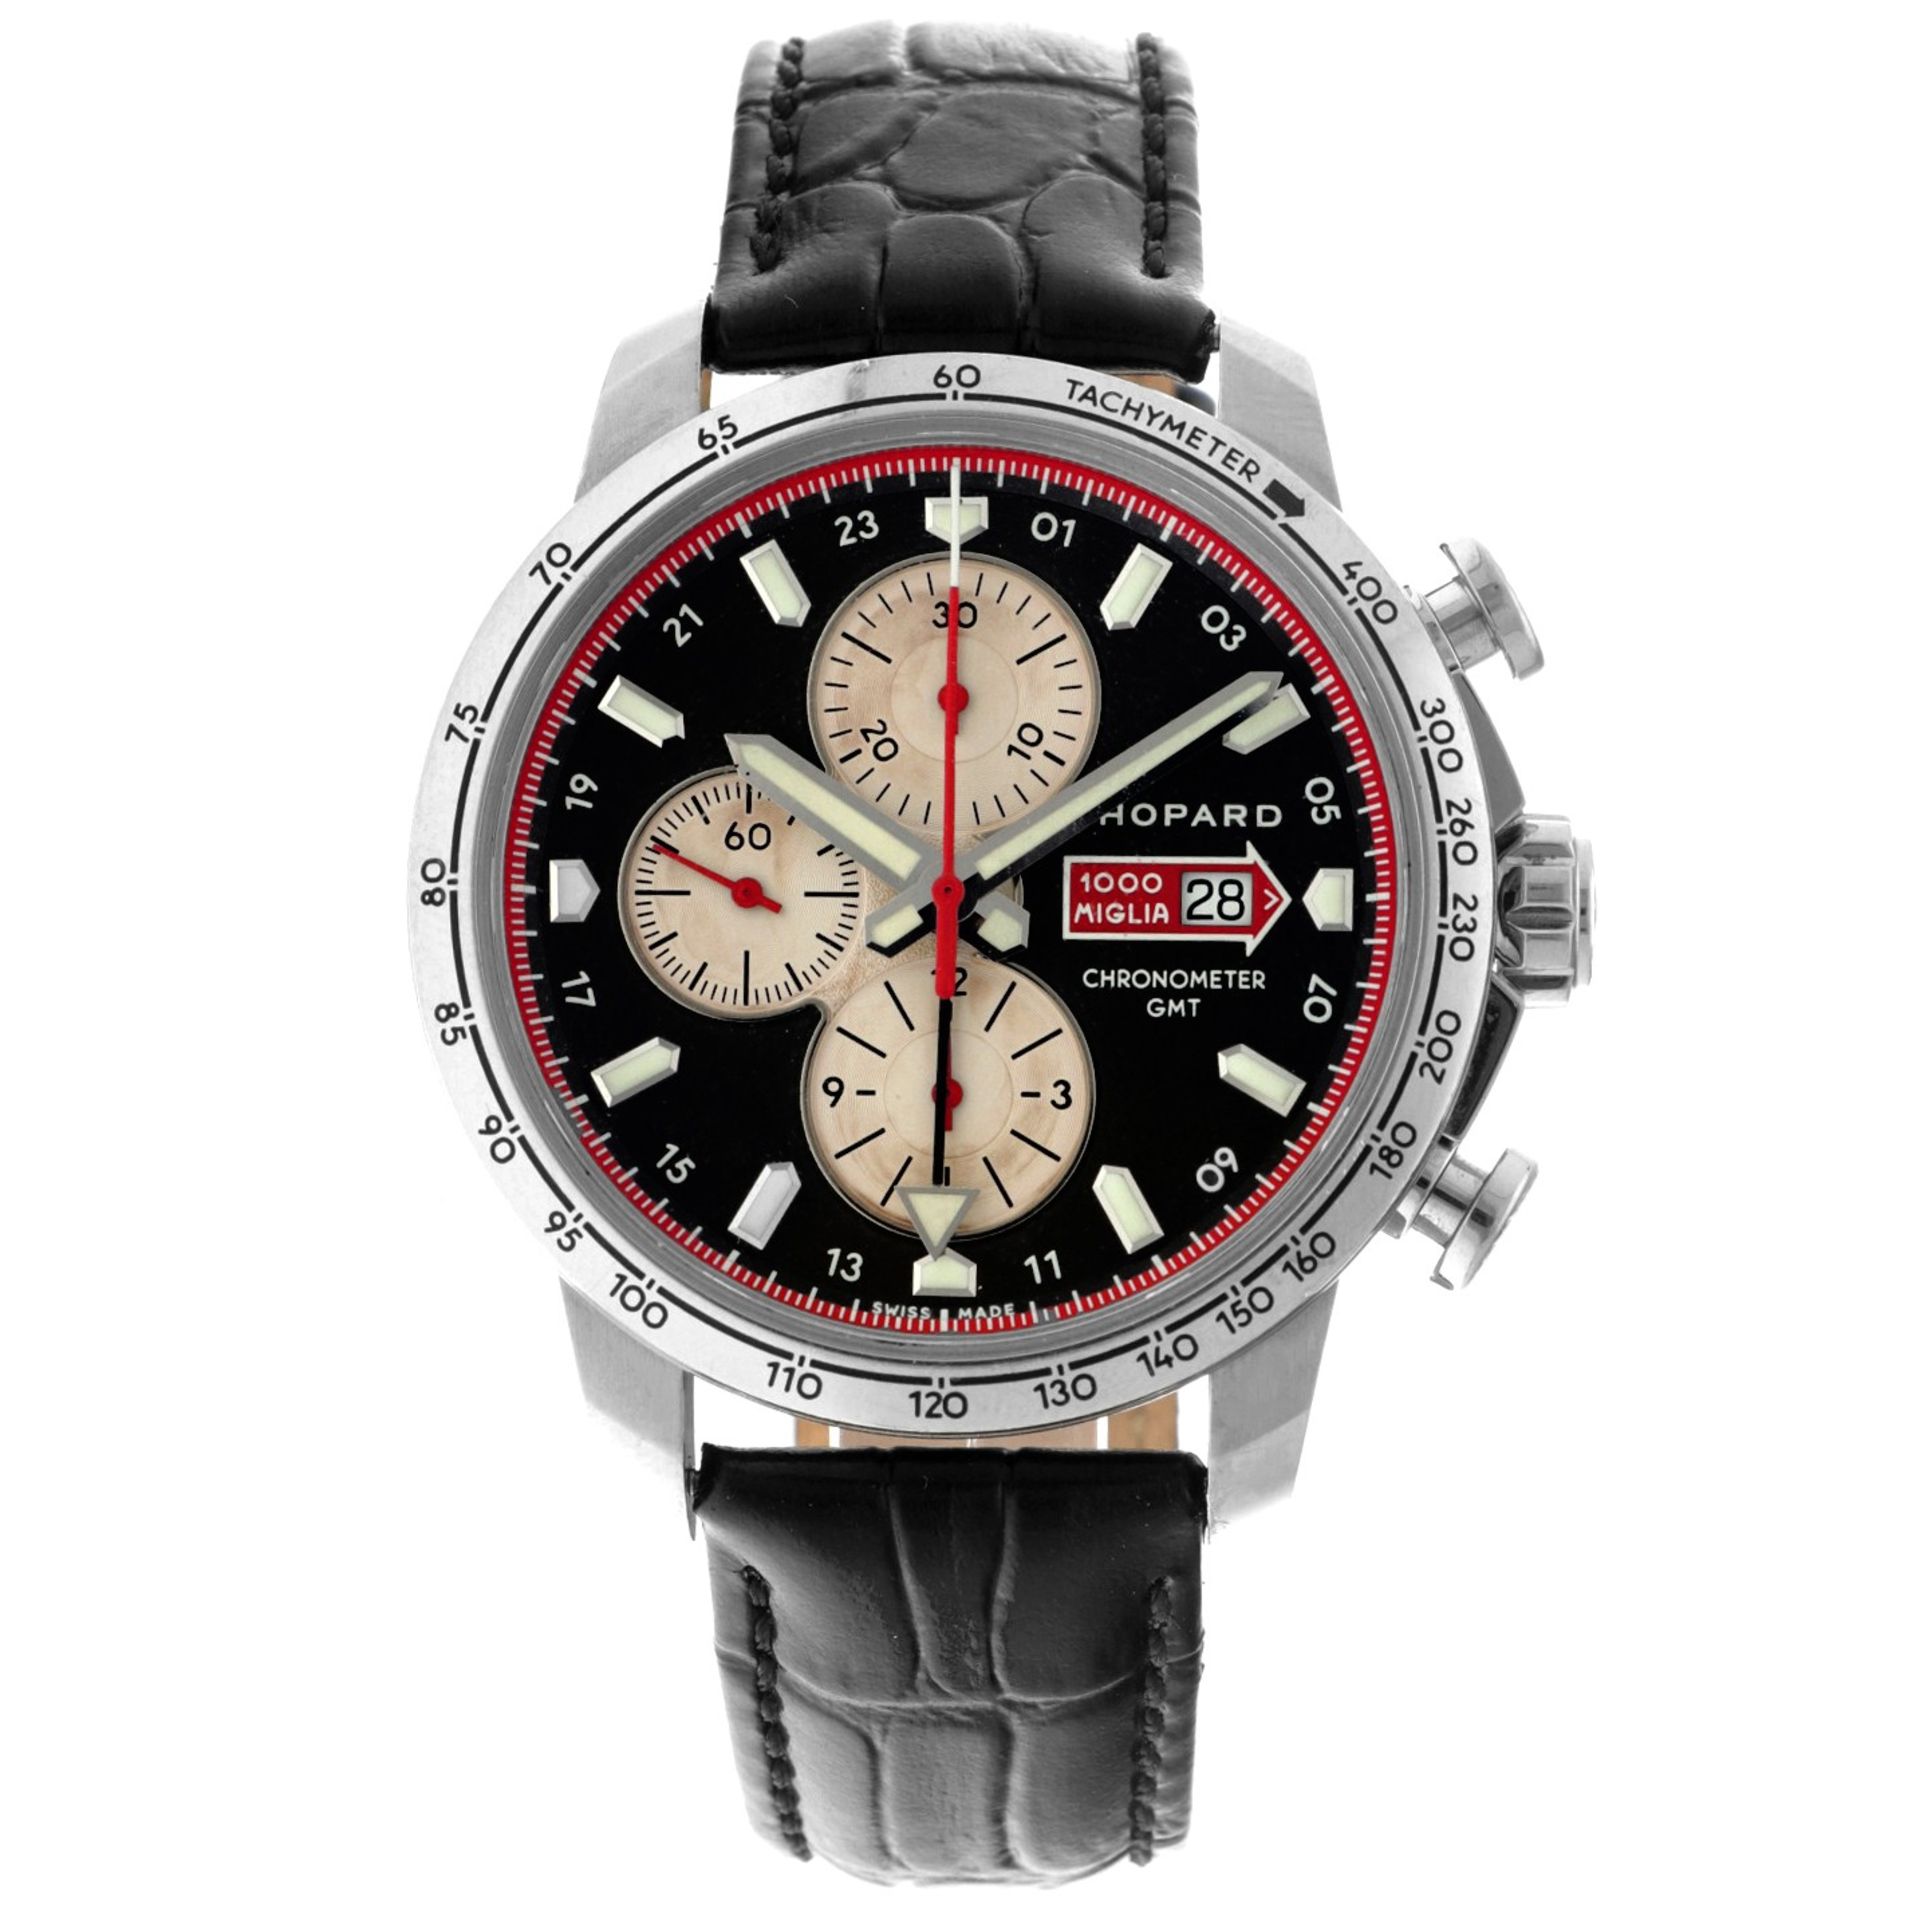 No Reserve - Chopard Mille Miglia Limited Edition 8555 - Men's watch - 2015-2023.